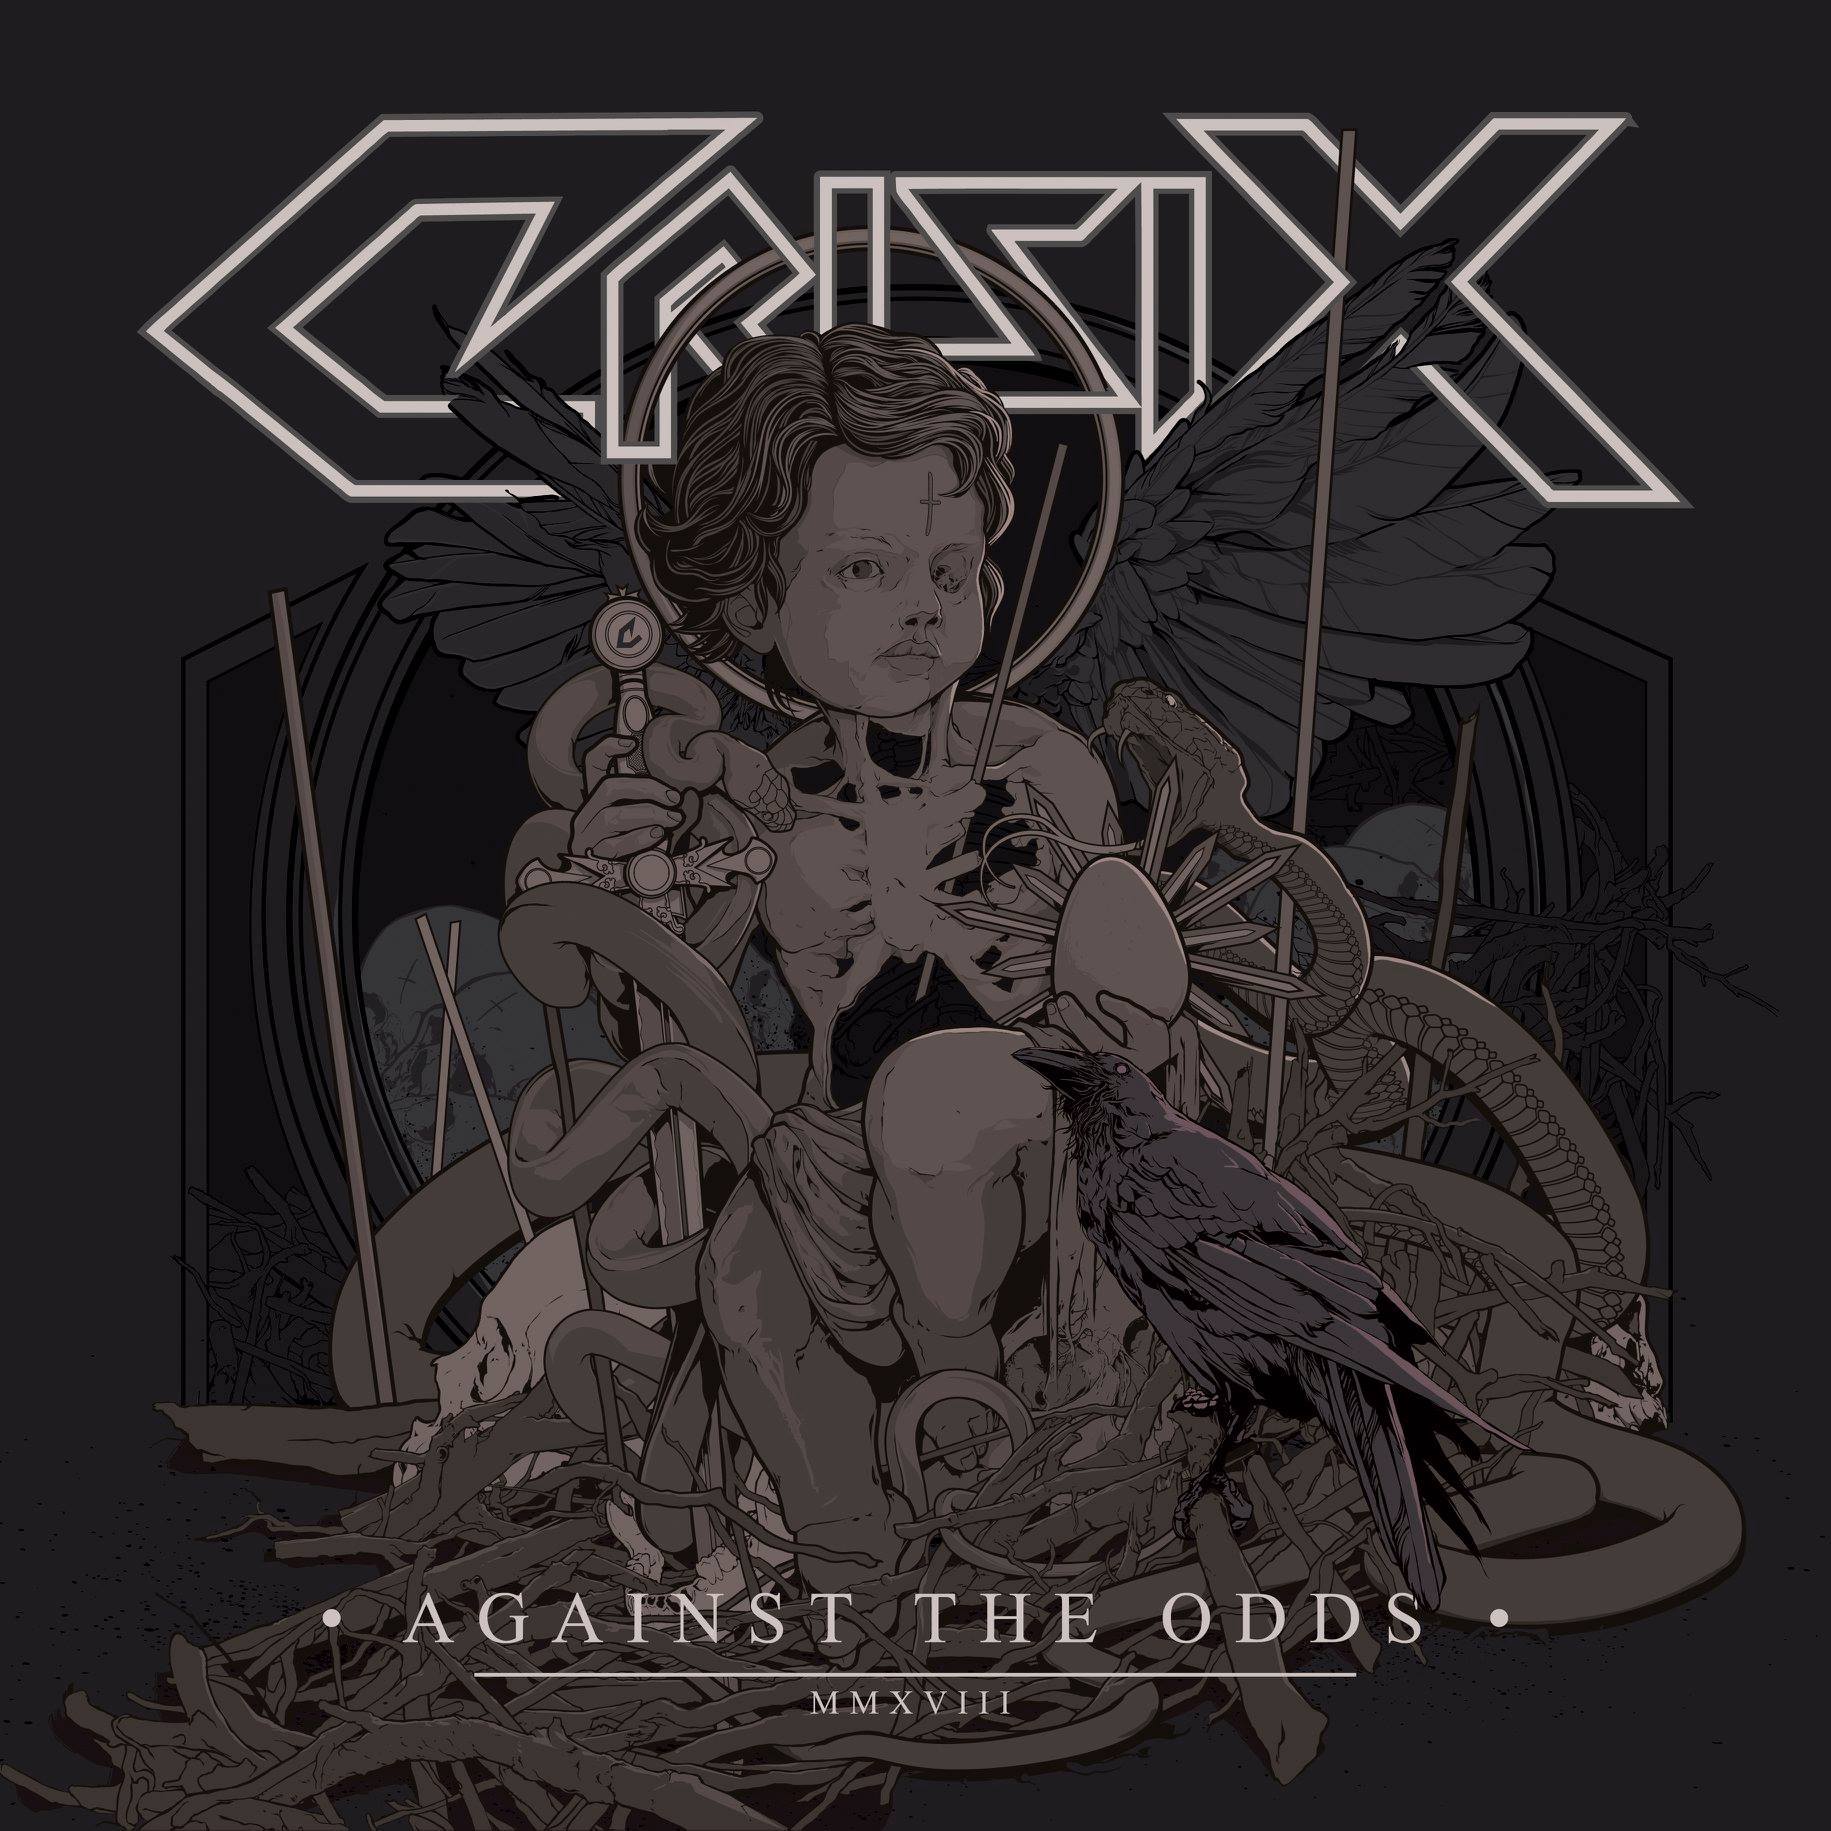 Crisix - Against the Odds Review | Angry Metal Guy